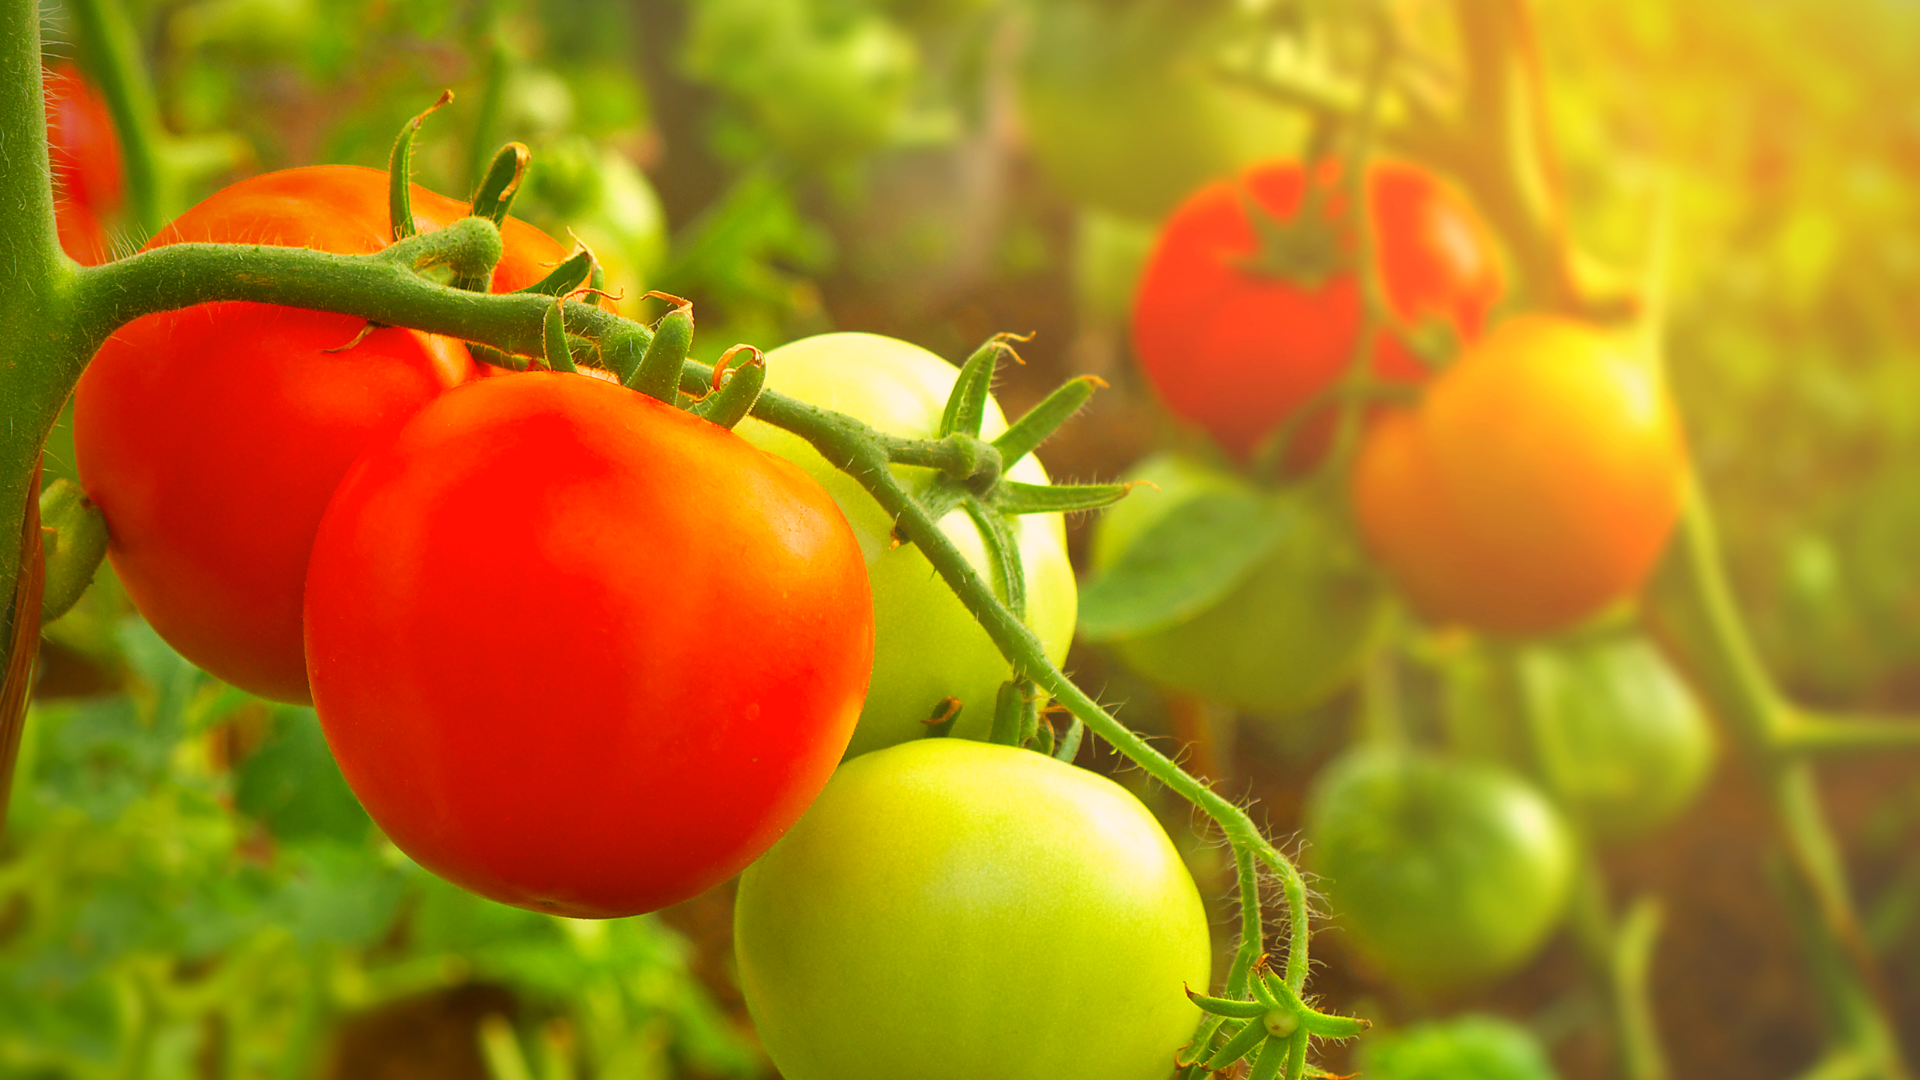 Growing Your Veggies is Screen-Free Plus 3 Other Benefits